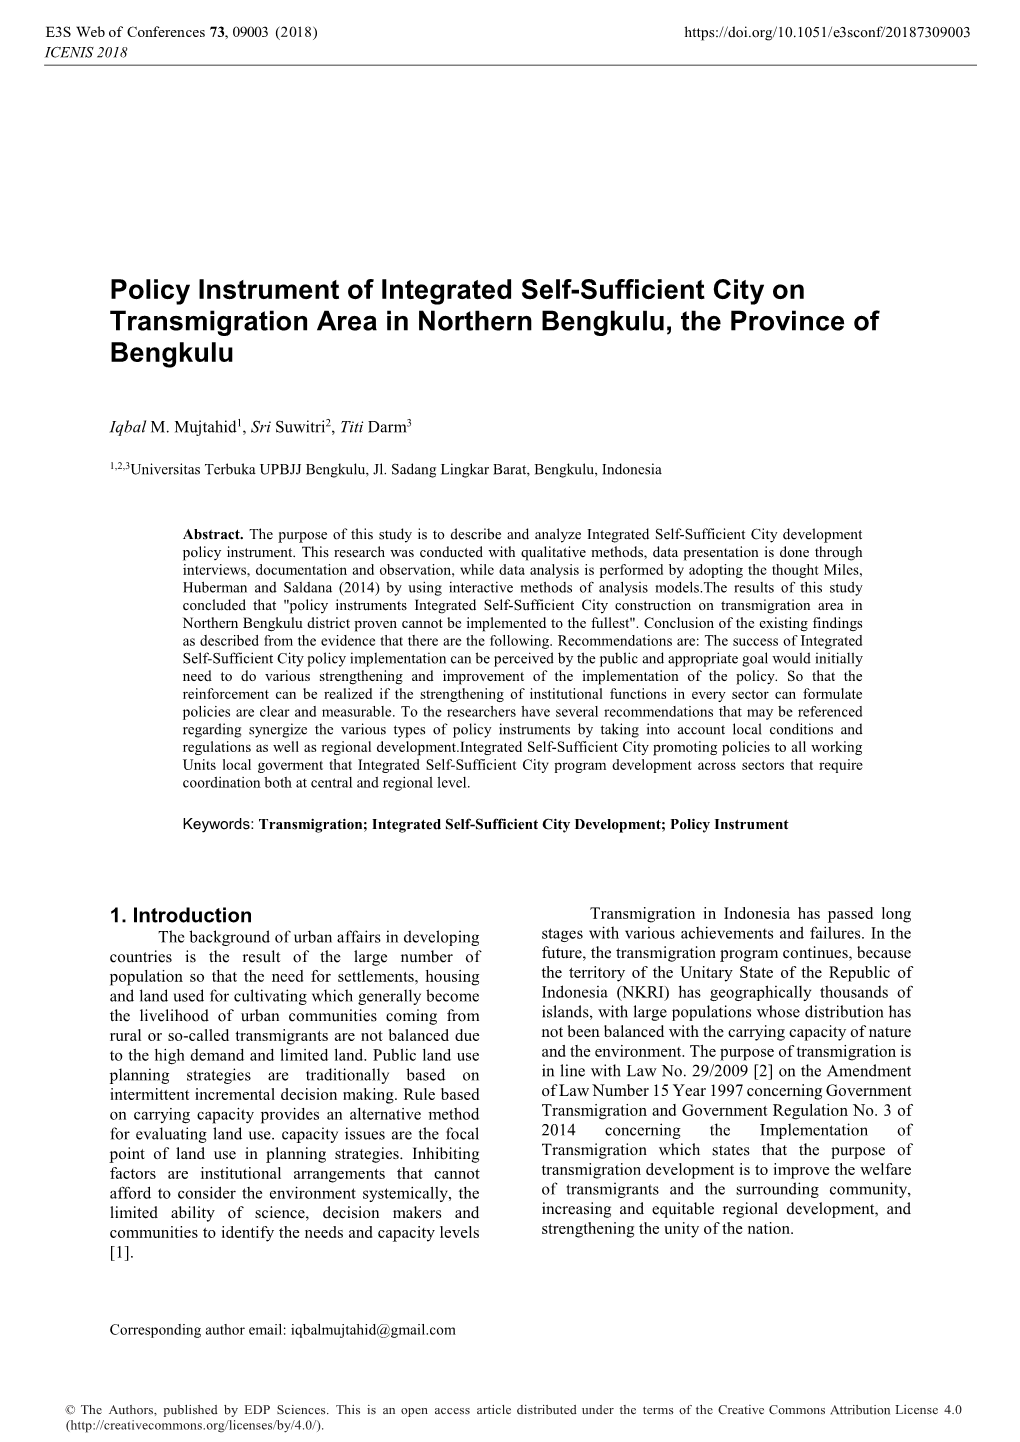 Policy Instrument of Integrated Self-Sufficient City on Transmigration Area in Northern Bengkulu, the Province of Bengkulu